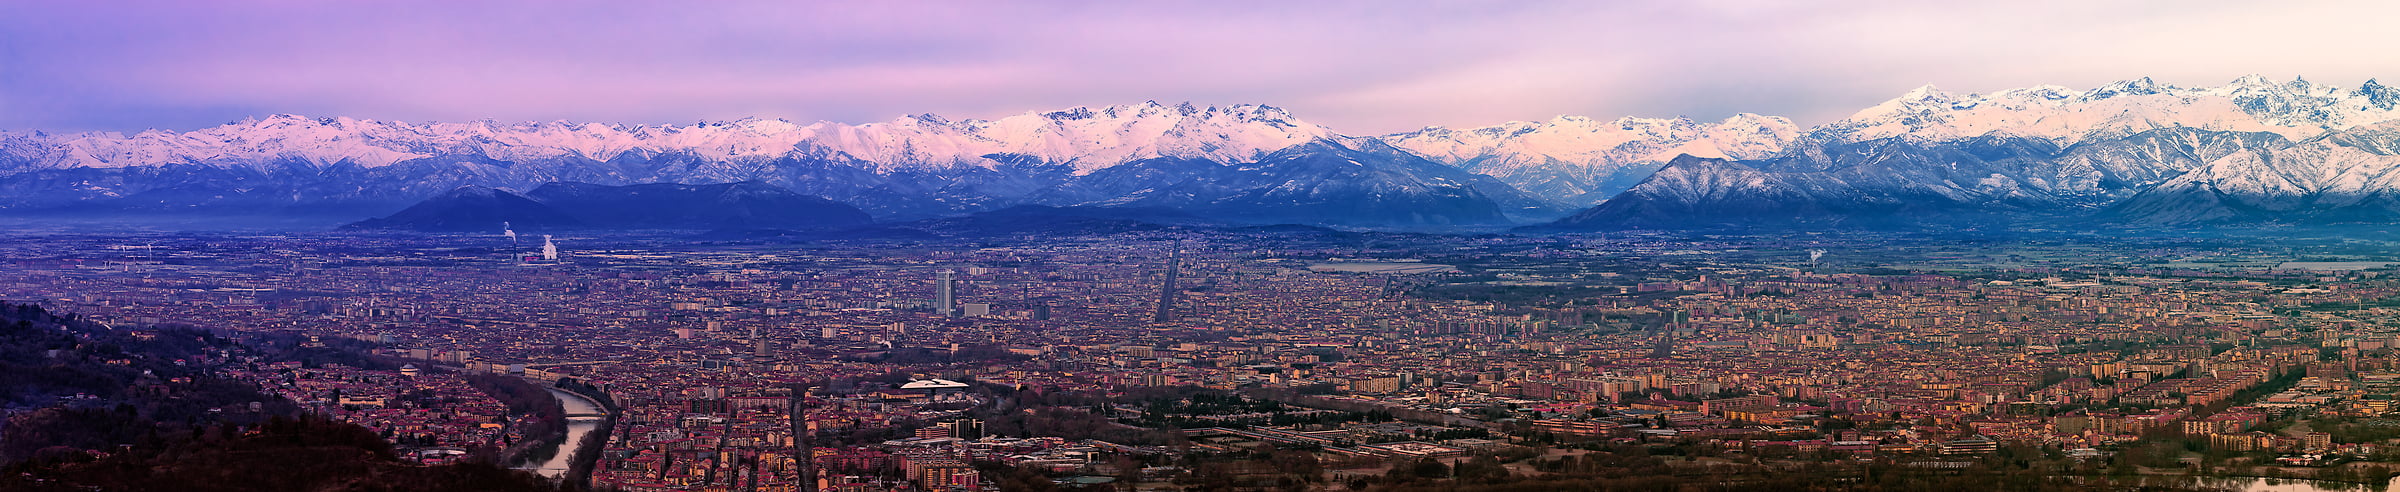 1,093 megapixels! A very high resolution, large-format VAST photo print of the city of Turin, Italy in front of the Alps; landscape photograph created by Duilio Fiorille in Turin, Piedmont, Italy.